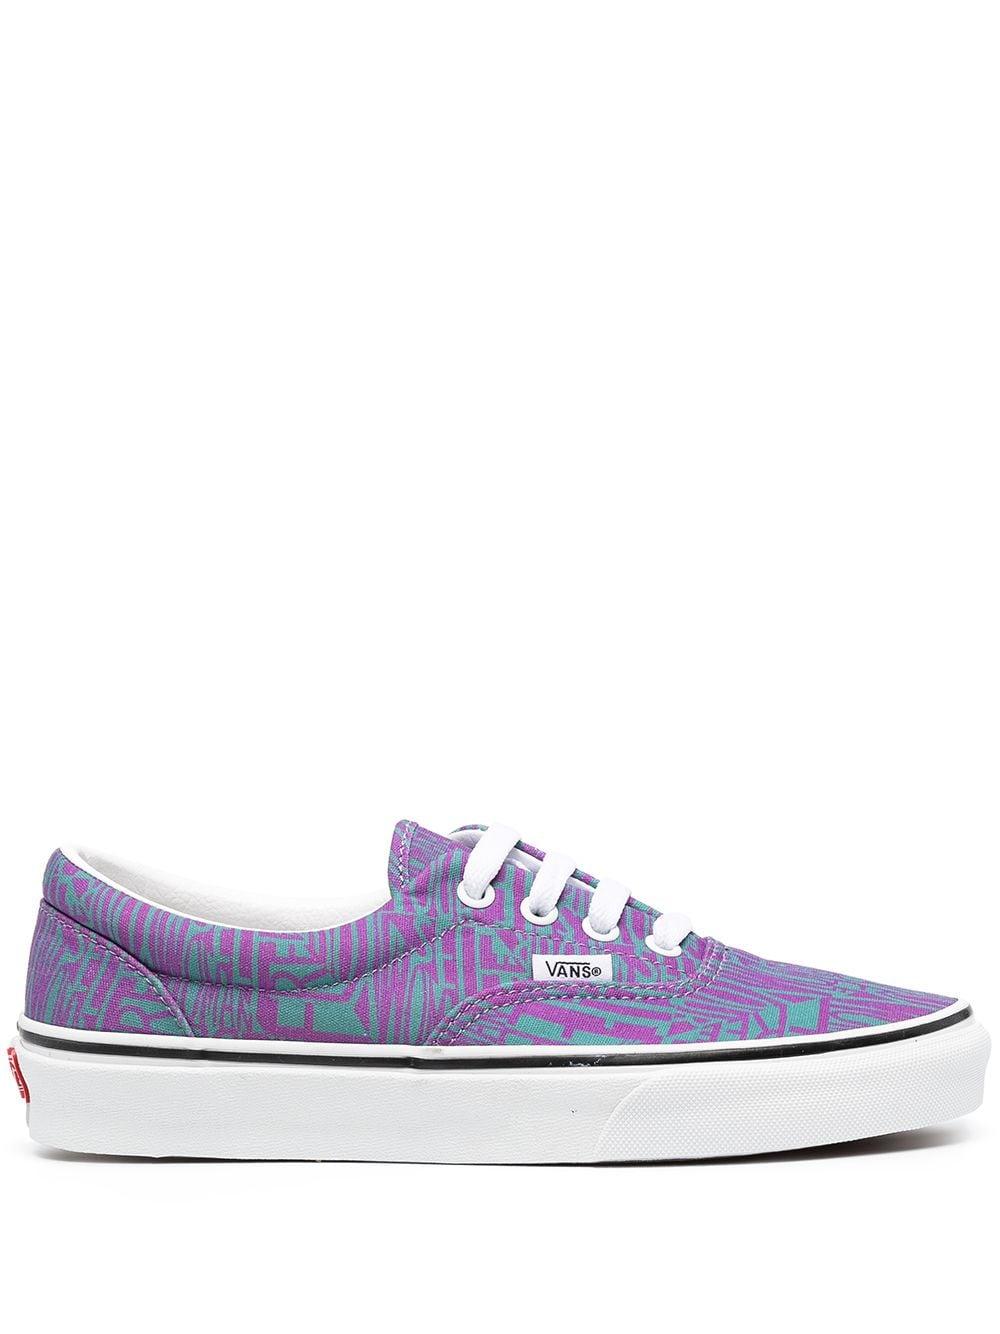 Vans X MoMA 'Faith Ringgold' Sneakers - Lyst